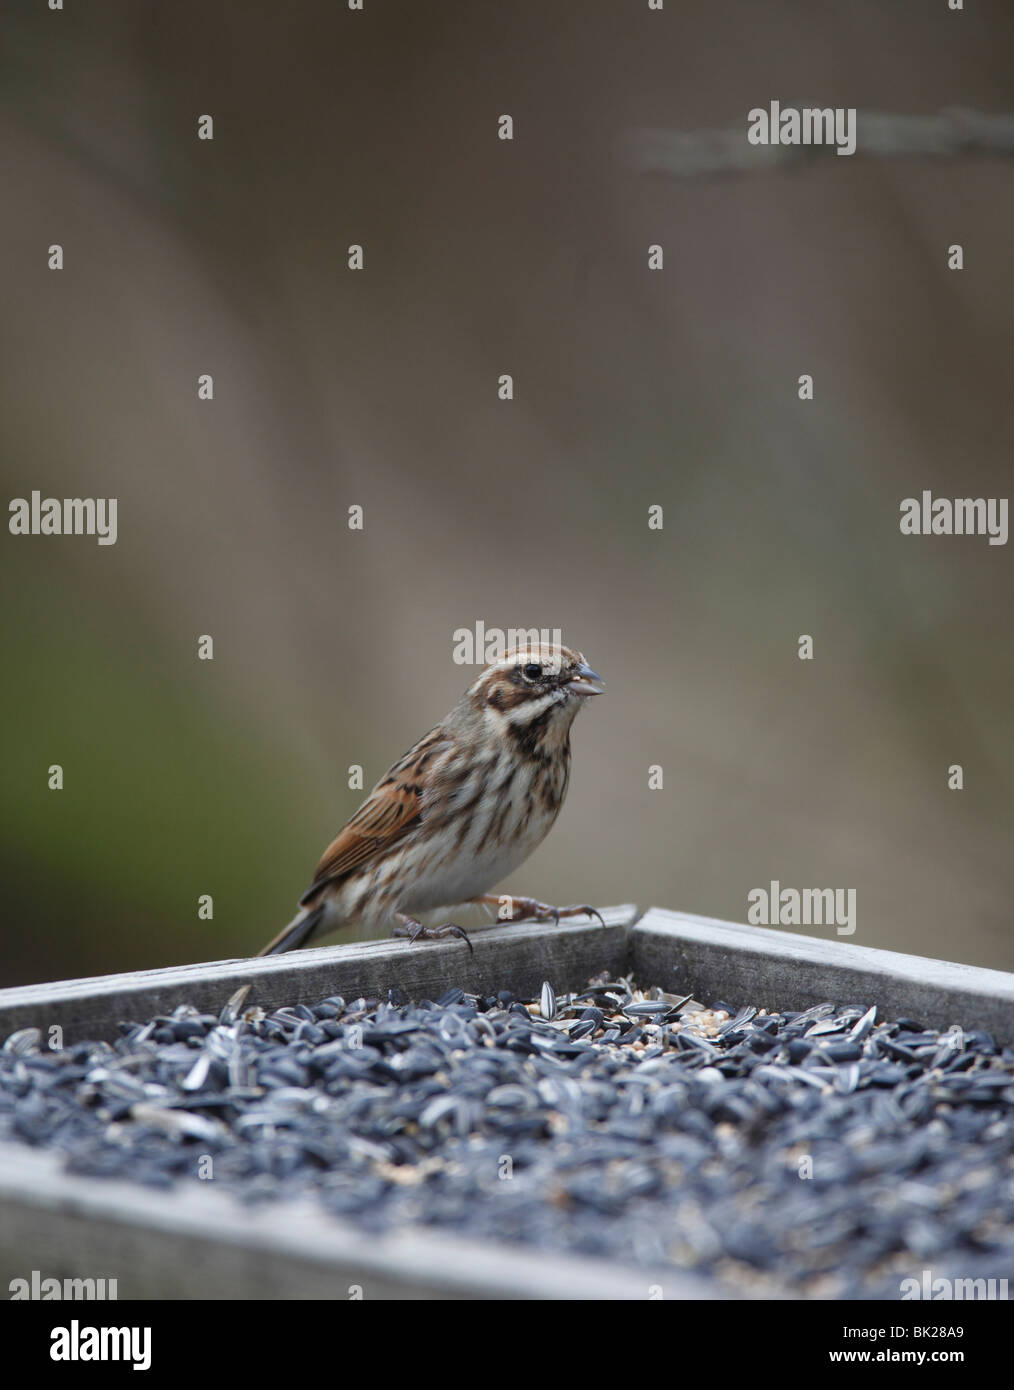 Reed bunting (Emberiza schoeniclus) female eating seed at bird table Stock Photo